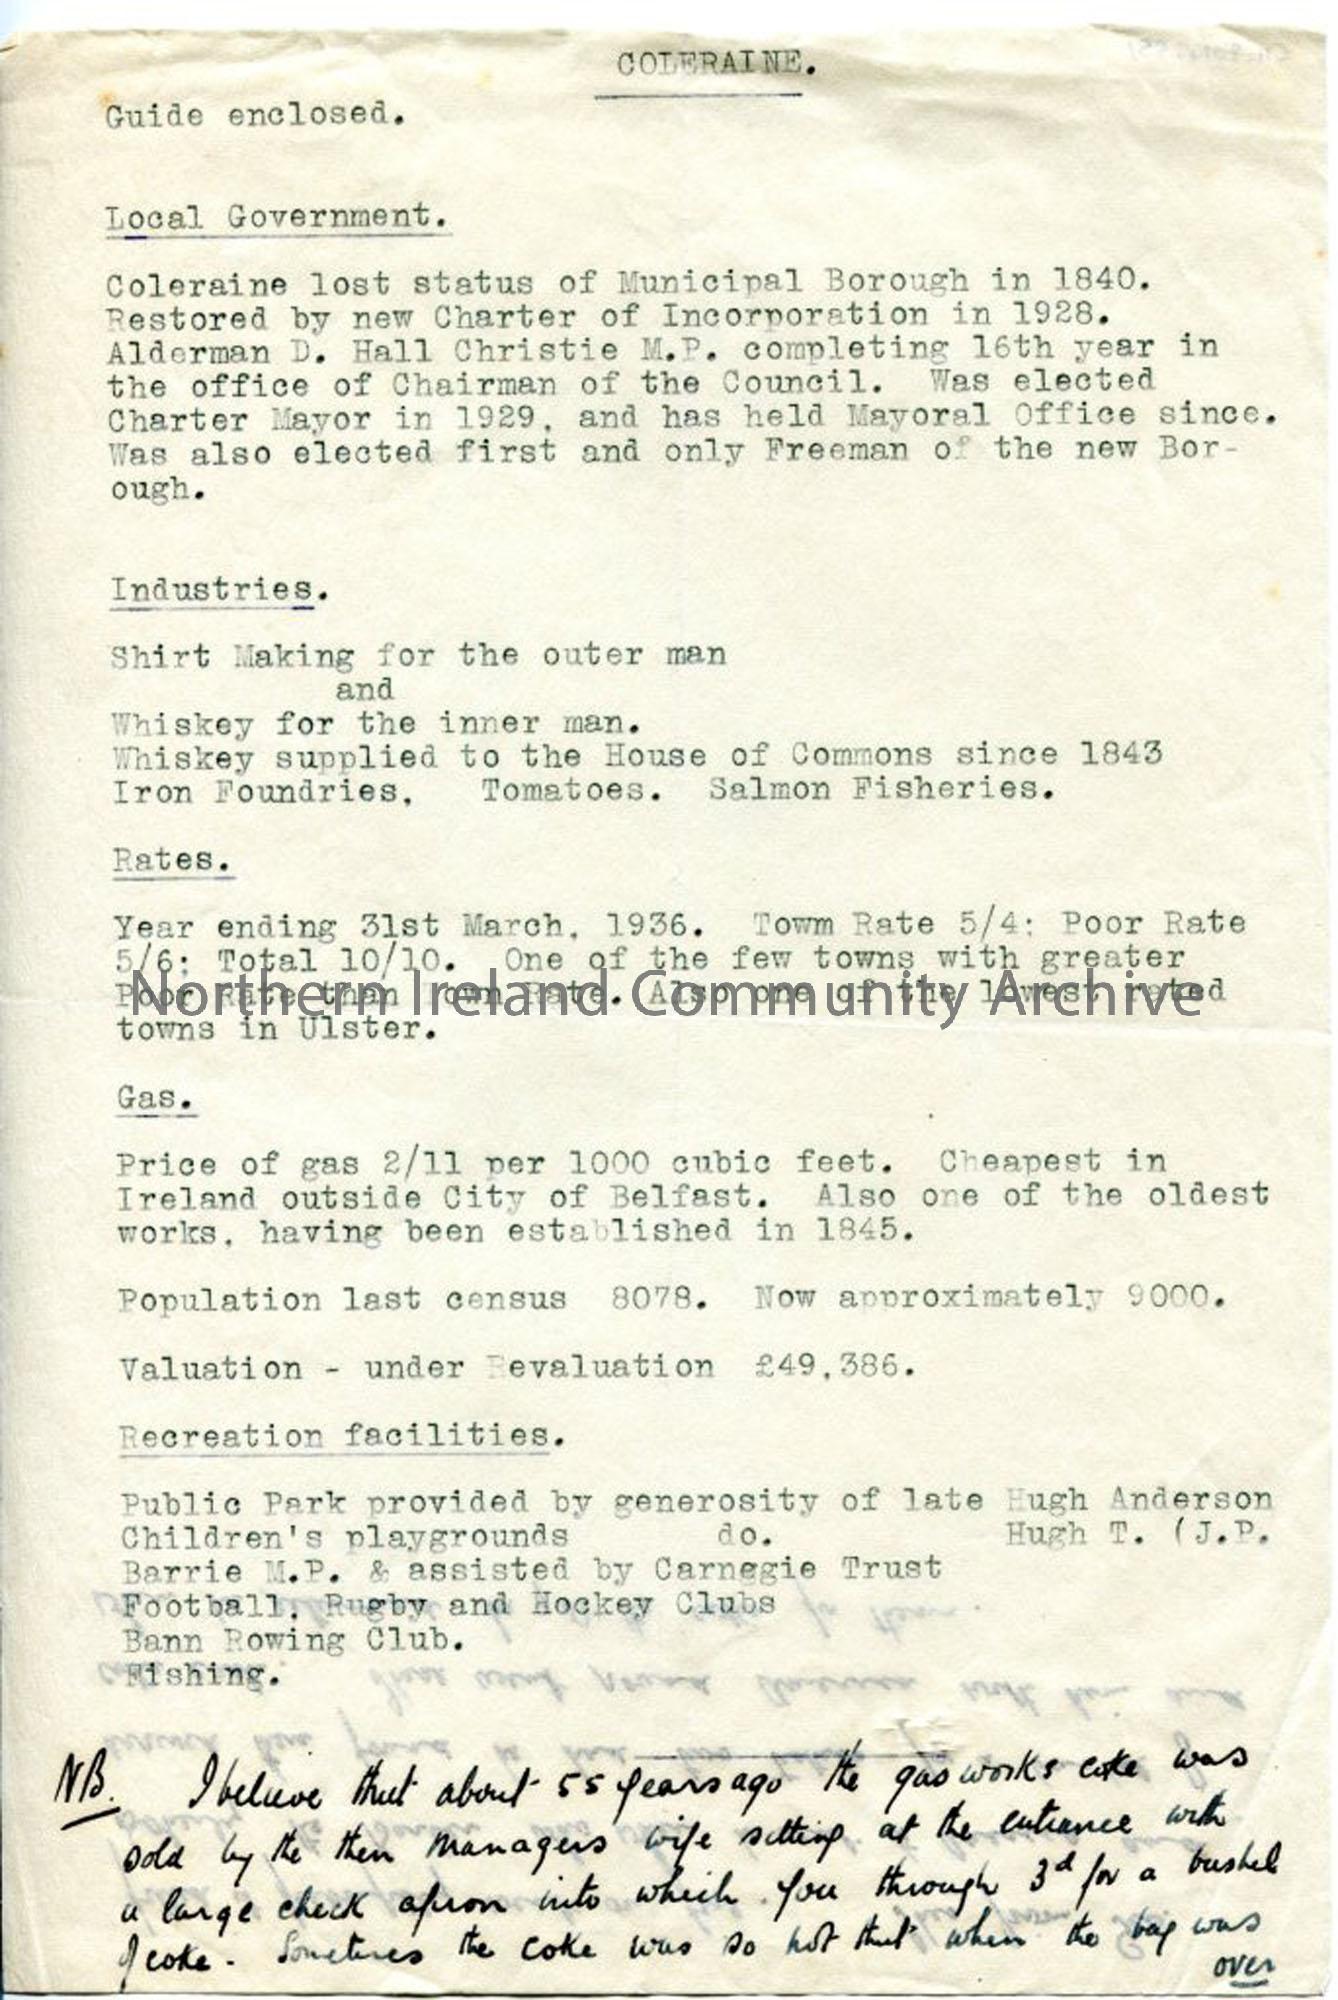 Page 1 of 2 – Notes re: Coleraine